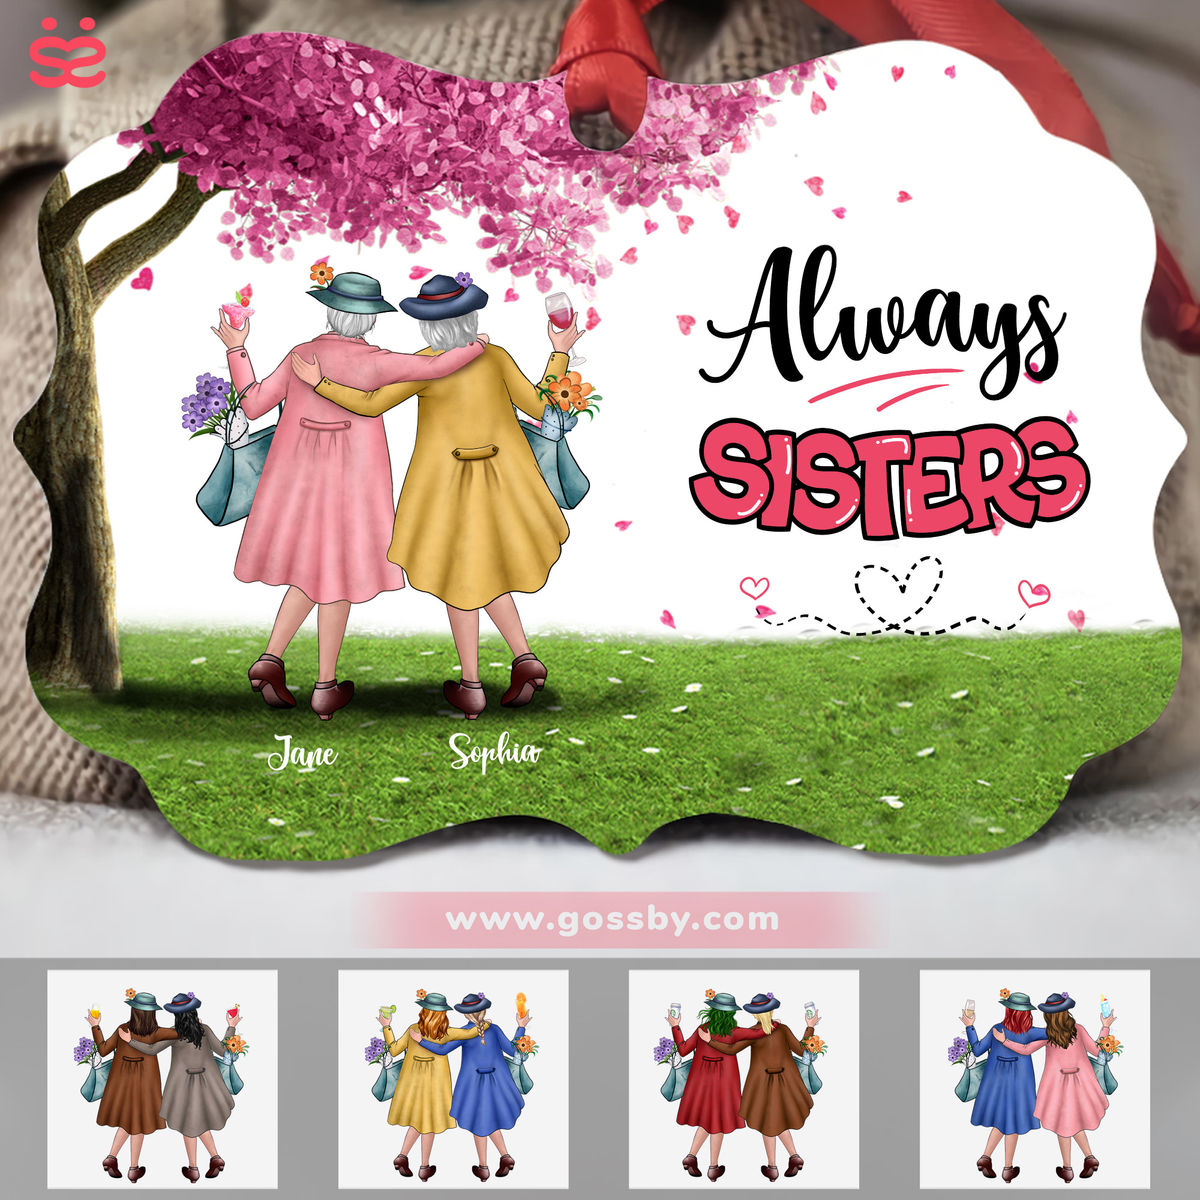 Personalized Ornament - 2 Sisters - Always Sisters (19628)_1